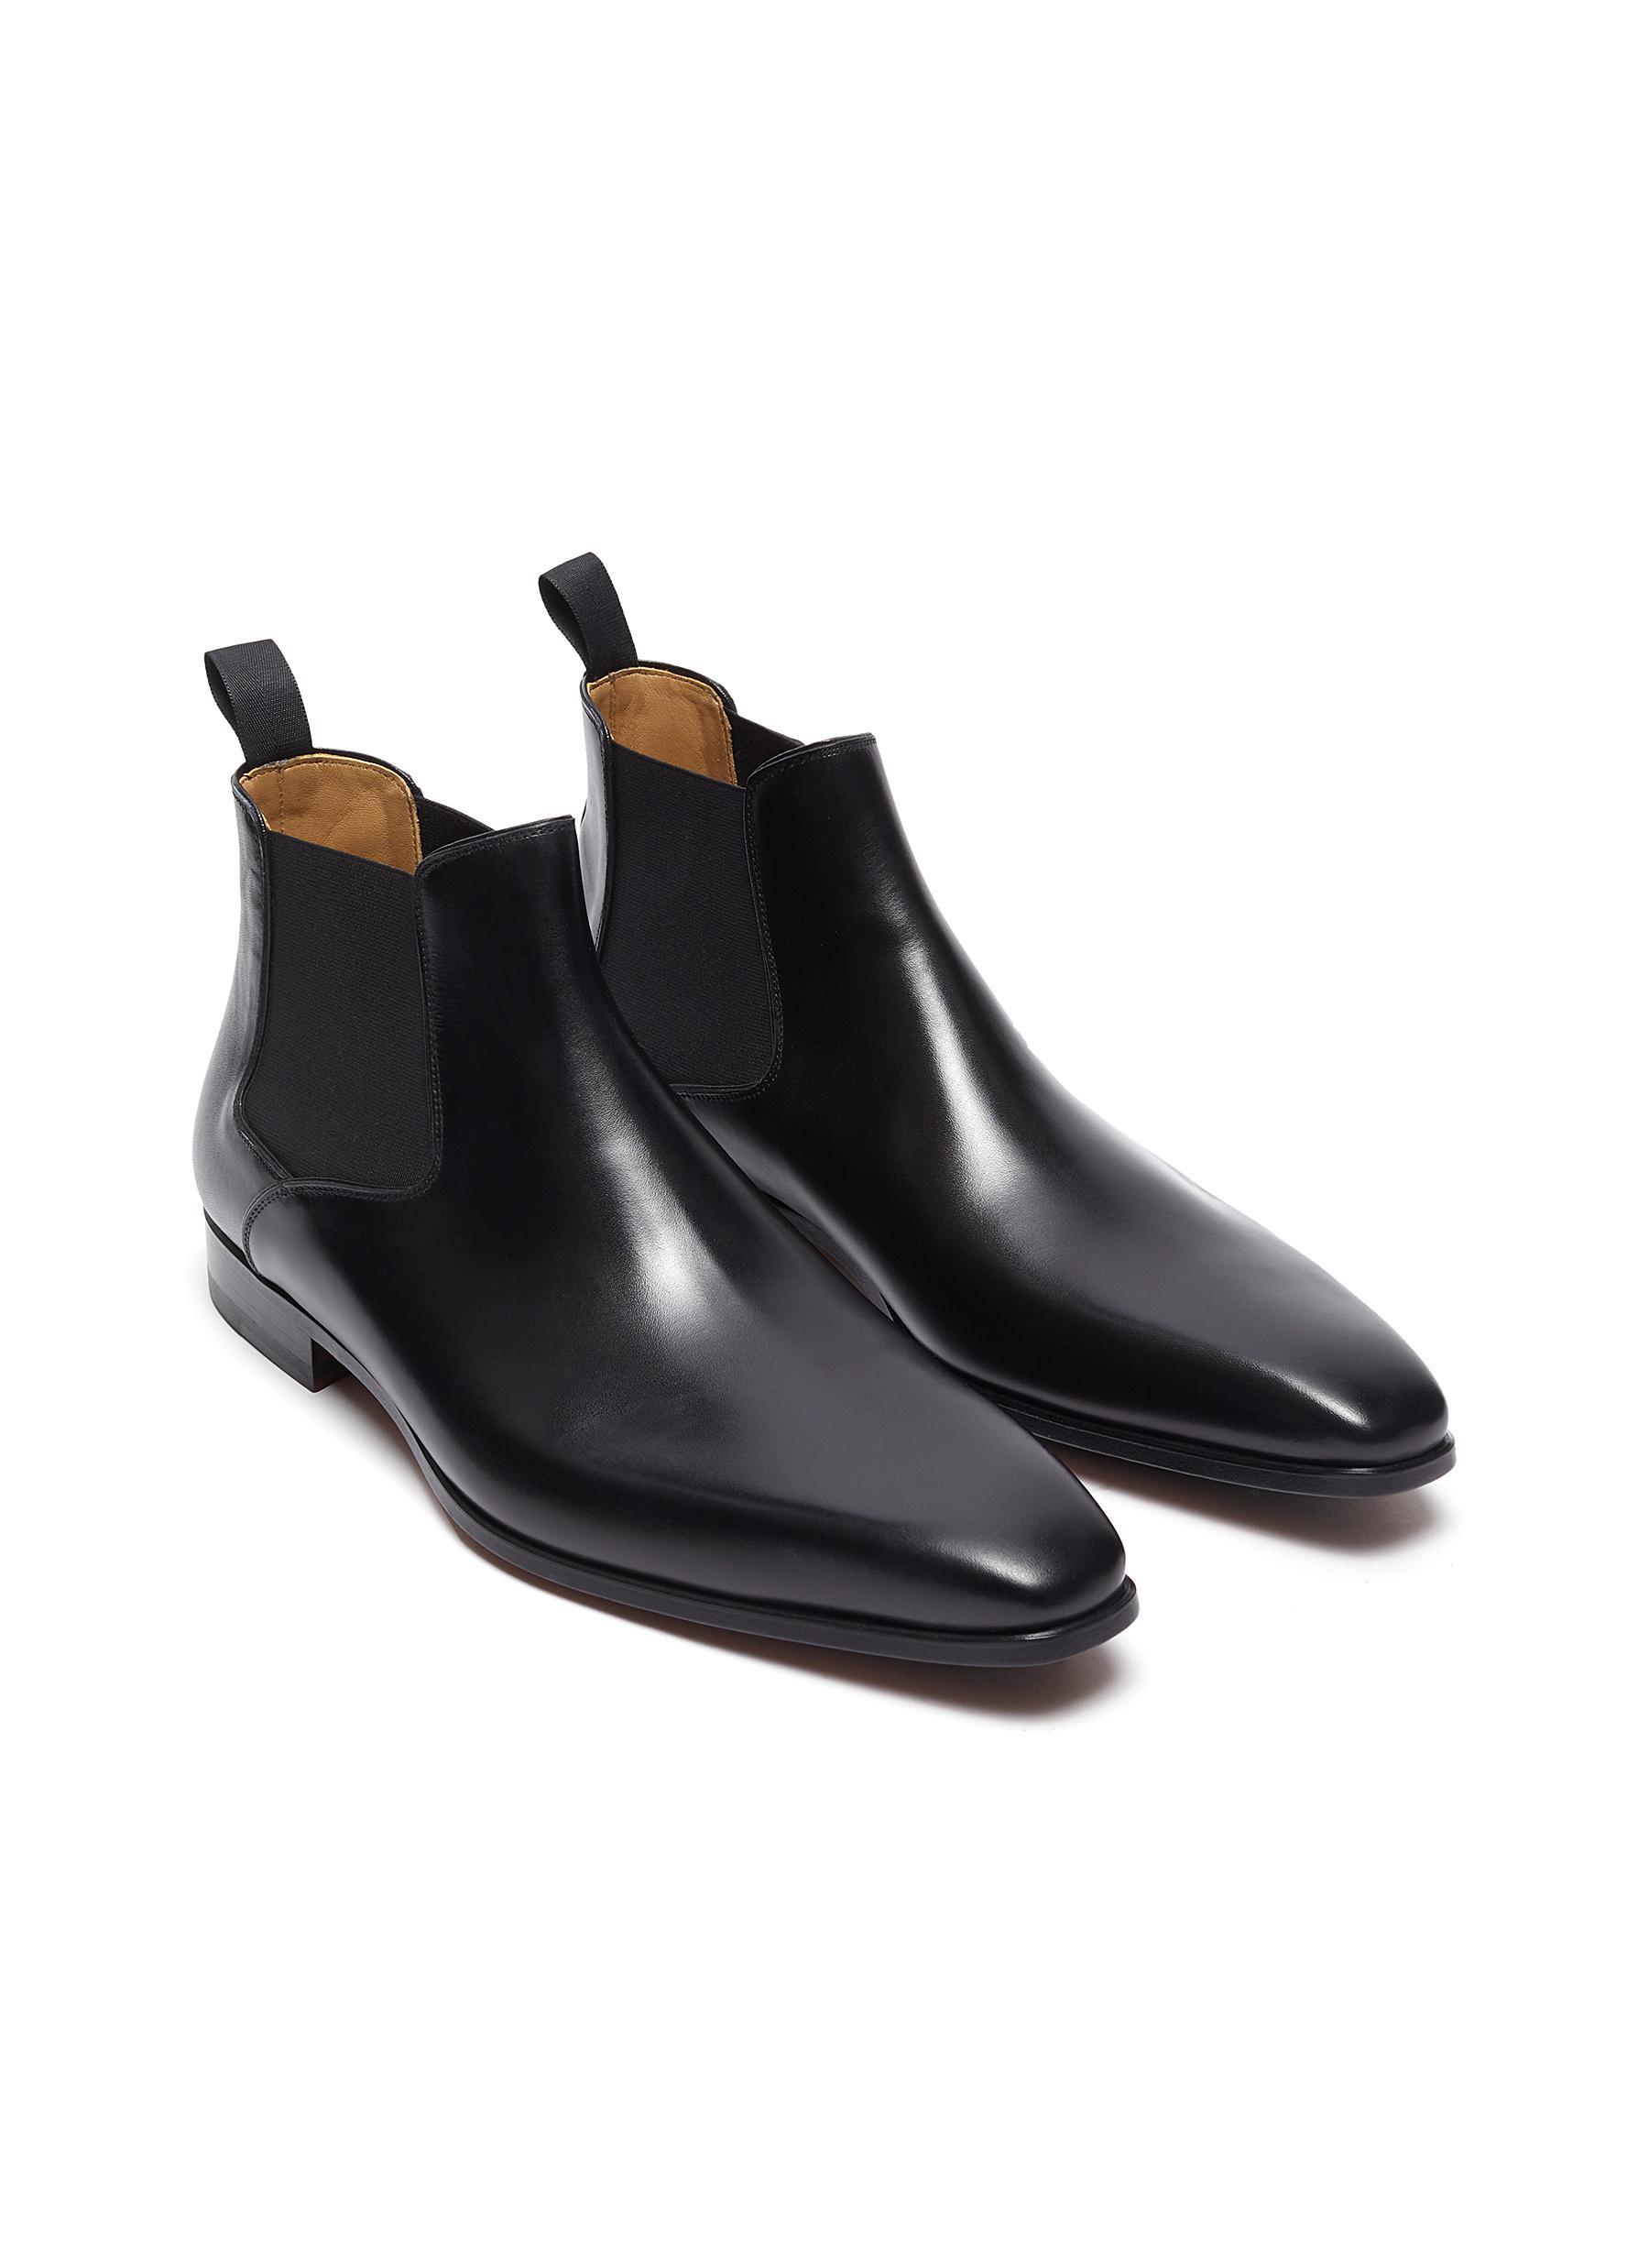 Magnanni Leather Chelsea Boots in Black for Men - Lyst